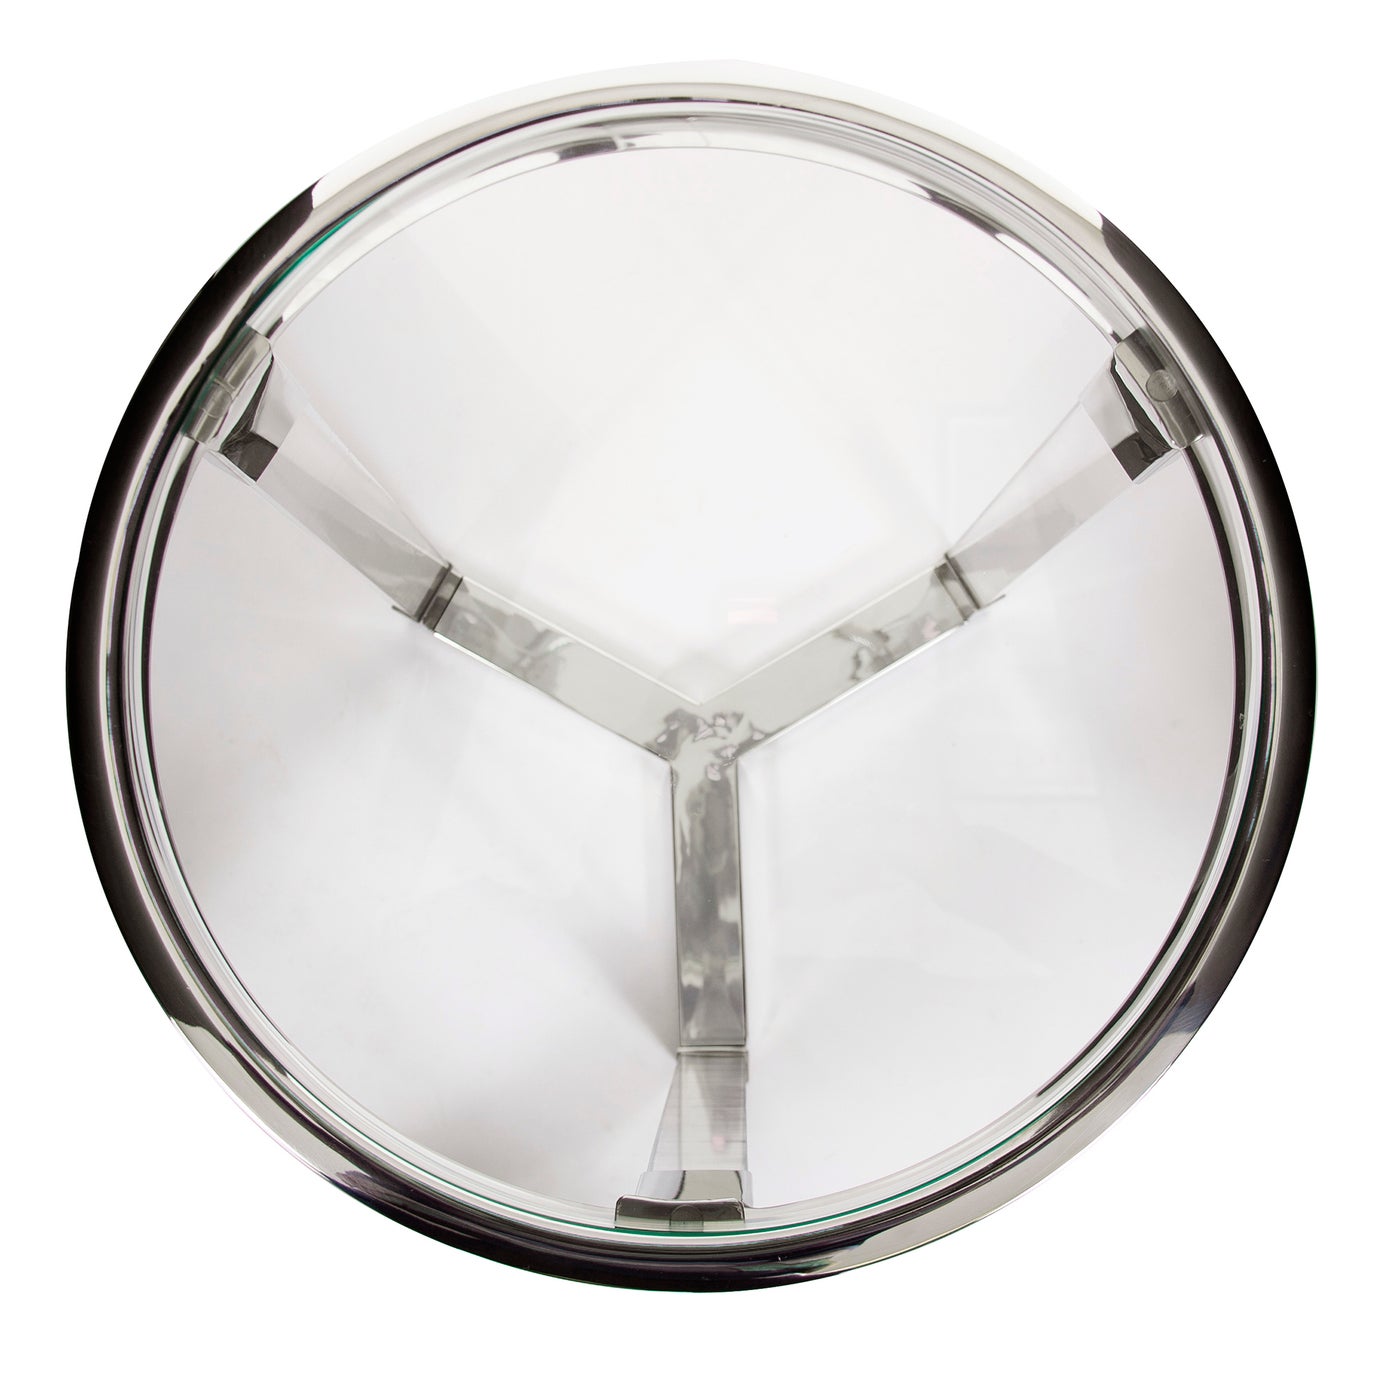 Acrylic & Stainless Steel Round Side Table